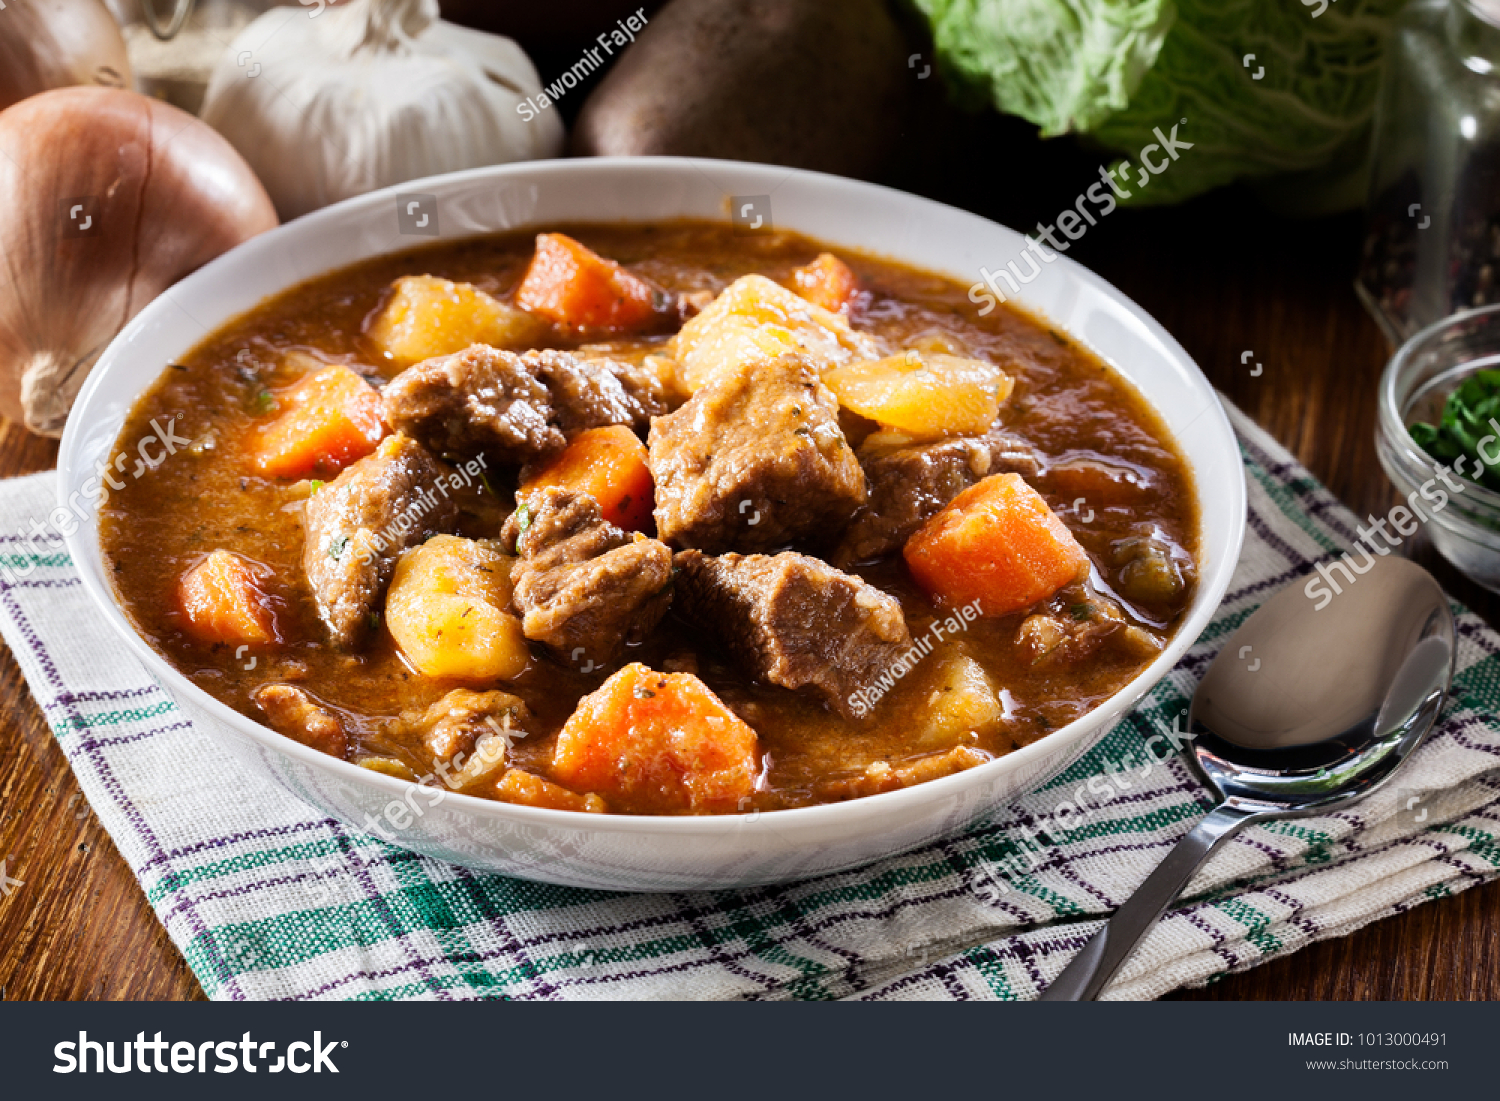 Irish stew made with beef, potatoes, carrots and herbs. Traditional  St patrick's day dish #1013000491